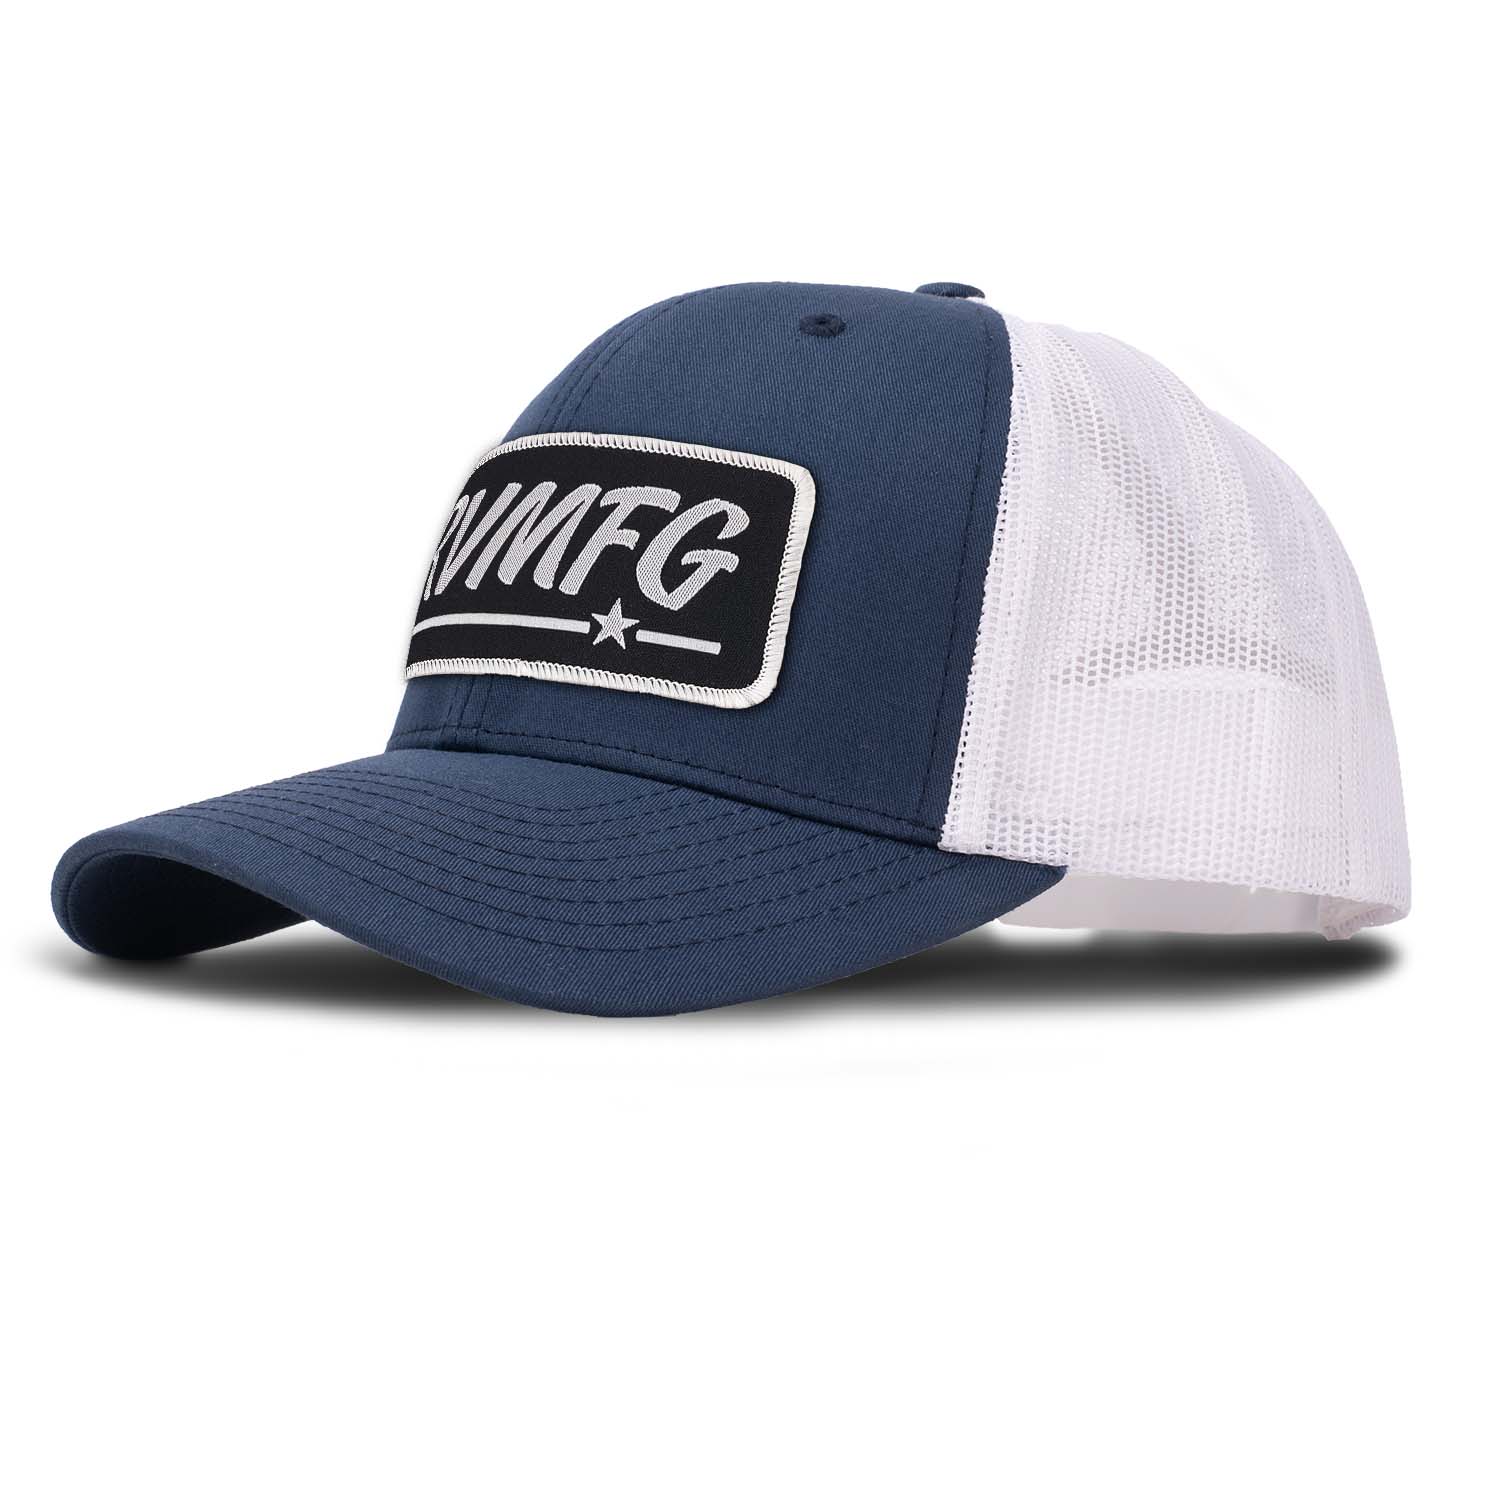 Revolution Mfg classic trucker hat in navy with white mesh with a black woven RVMFG patch with white letters and a white border